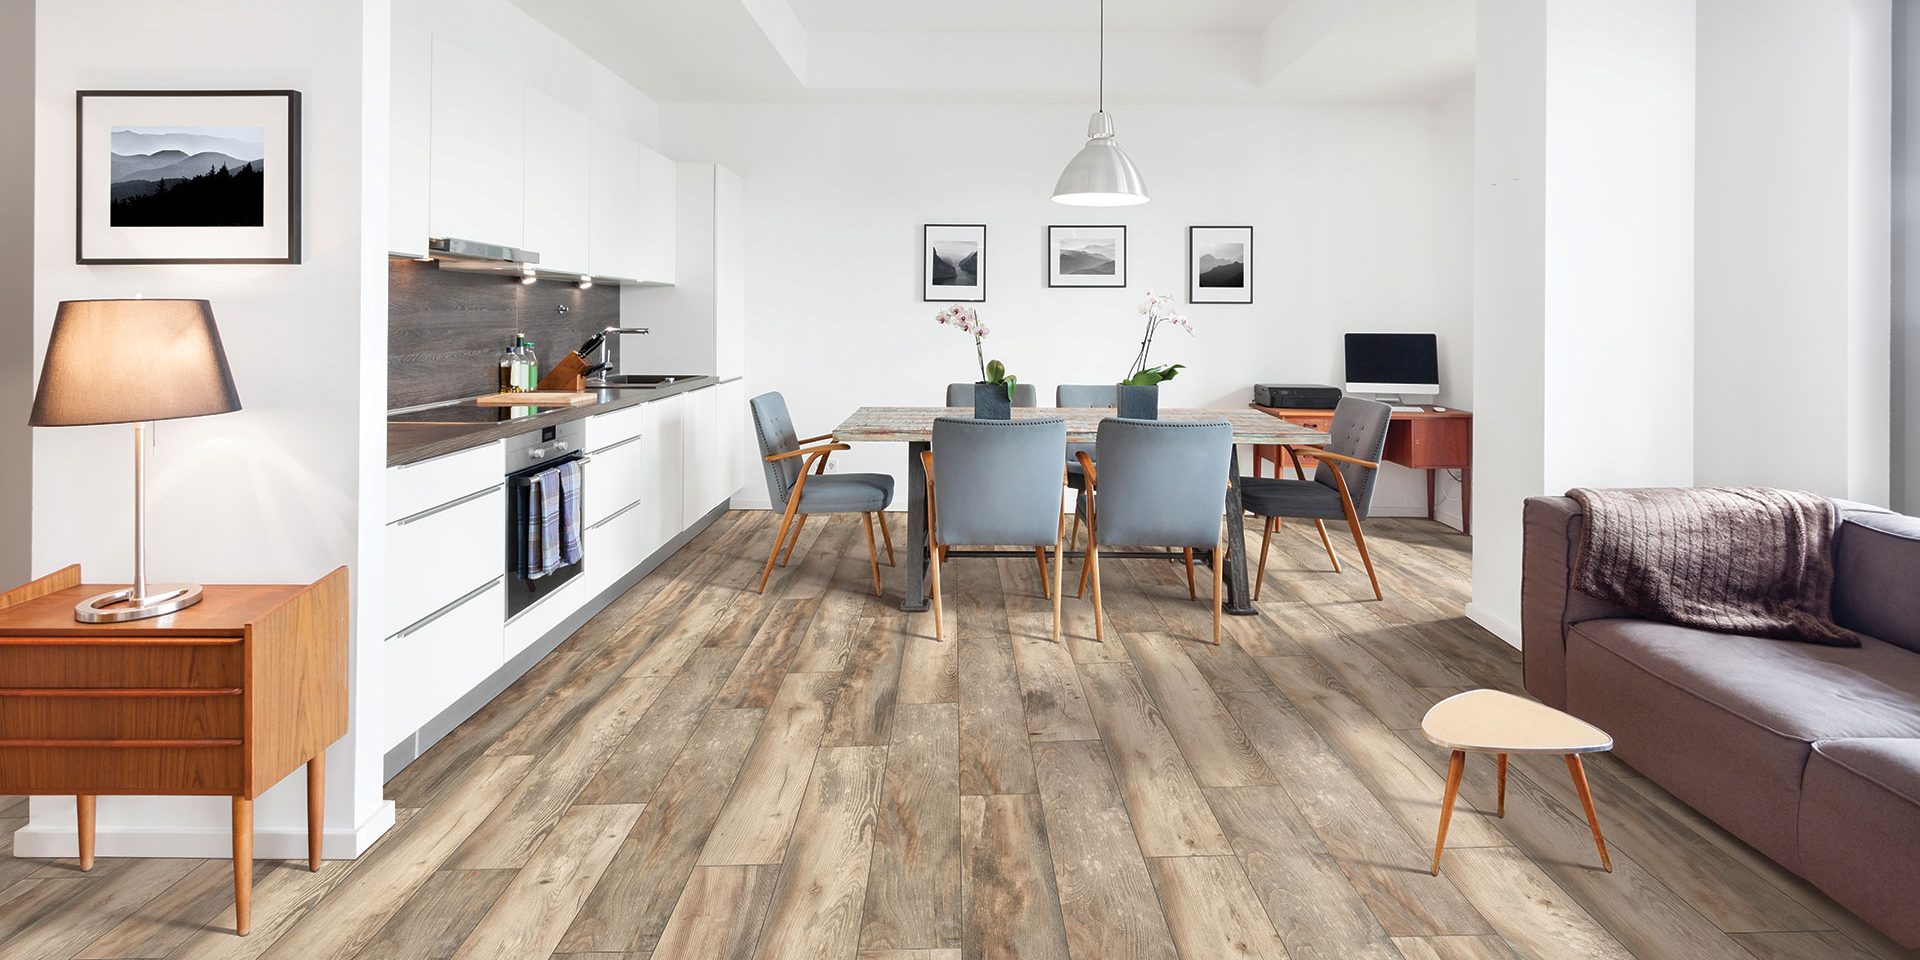 5 Best Laminate Flooring Colours For, How To Color Laminate Flooring